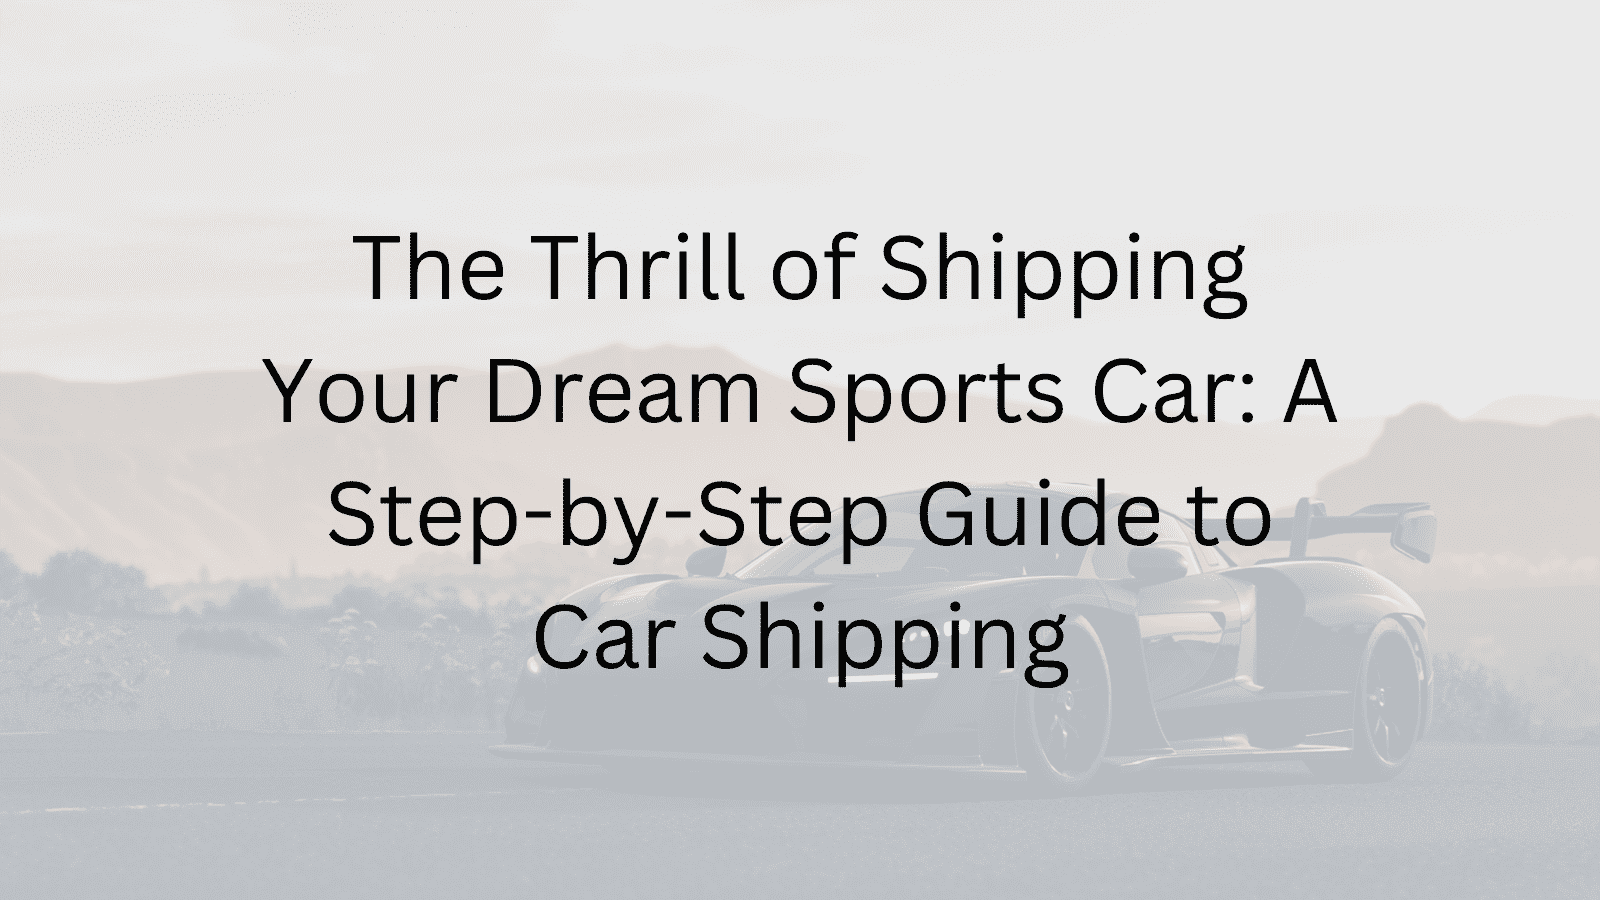 A Step-by-Step Guide to Car Shipping